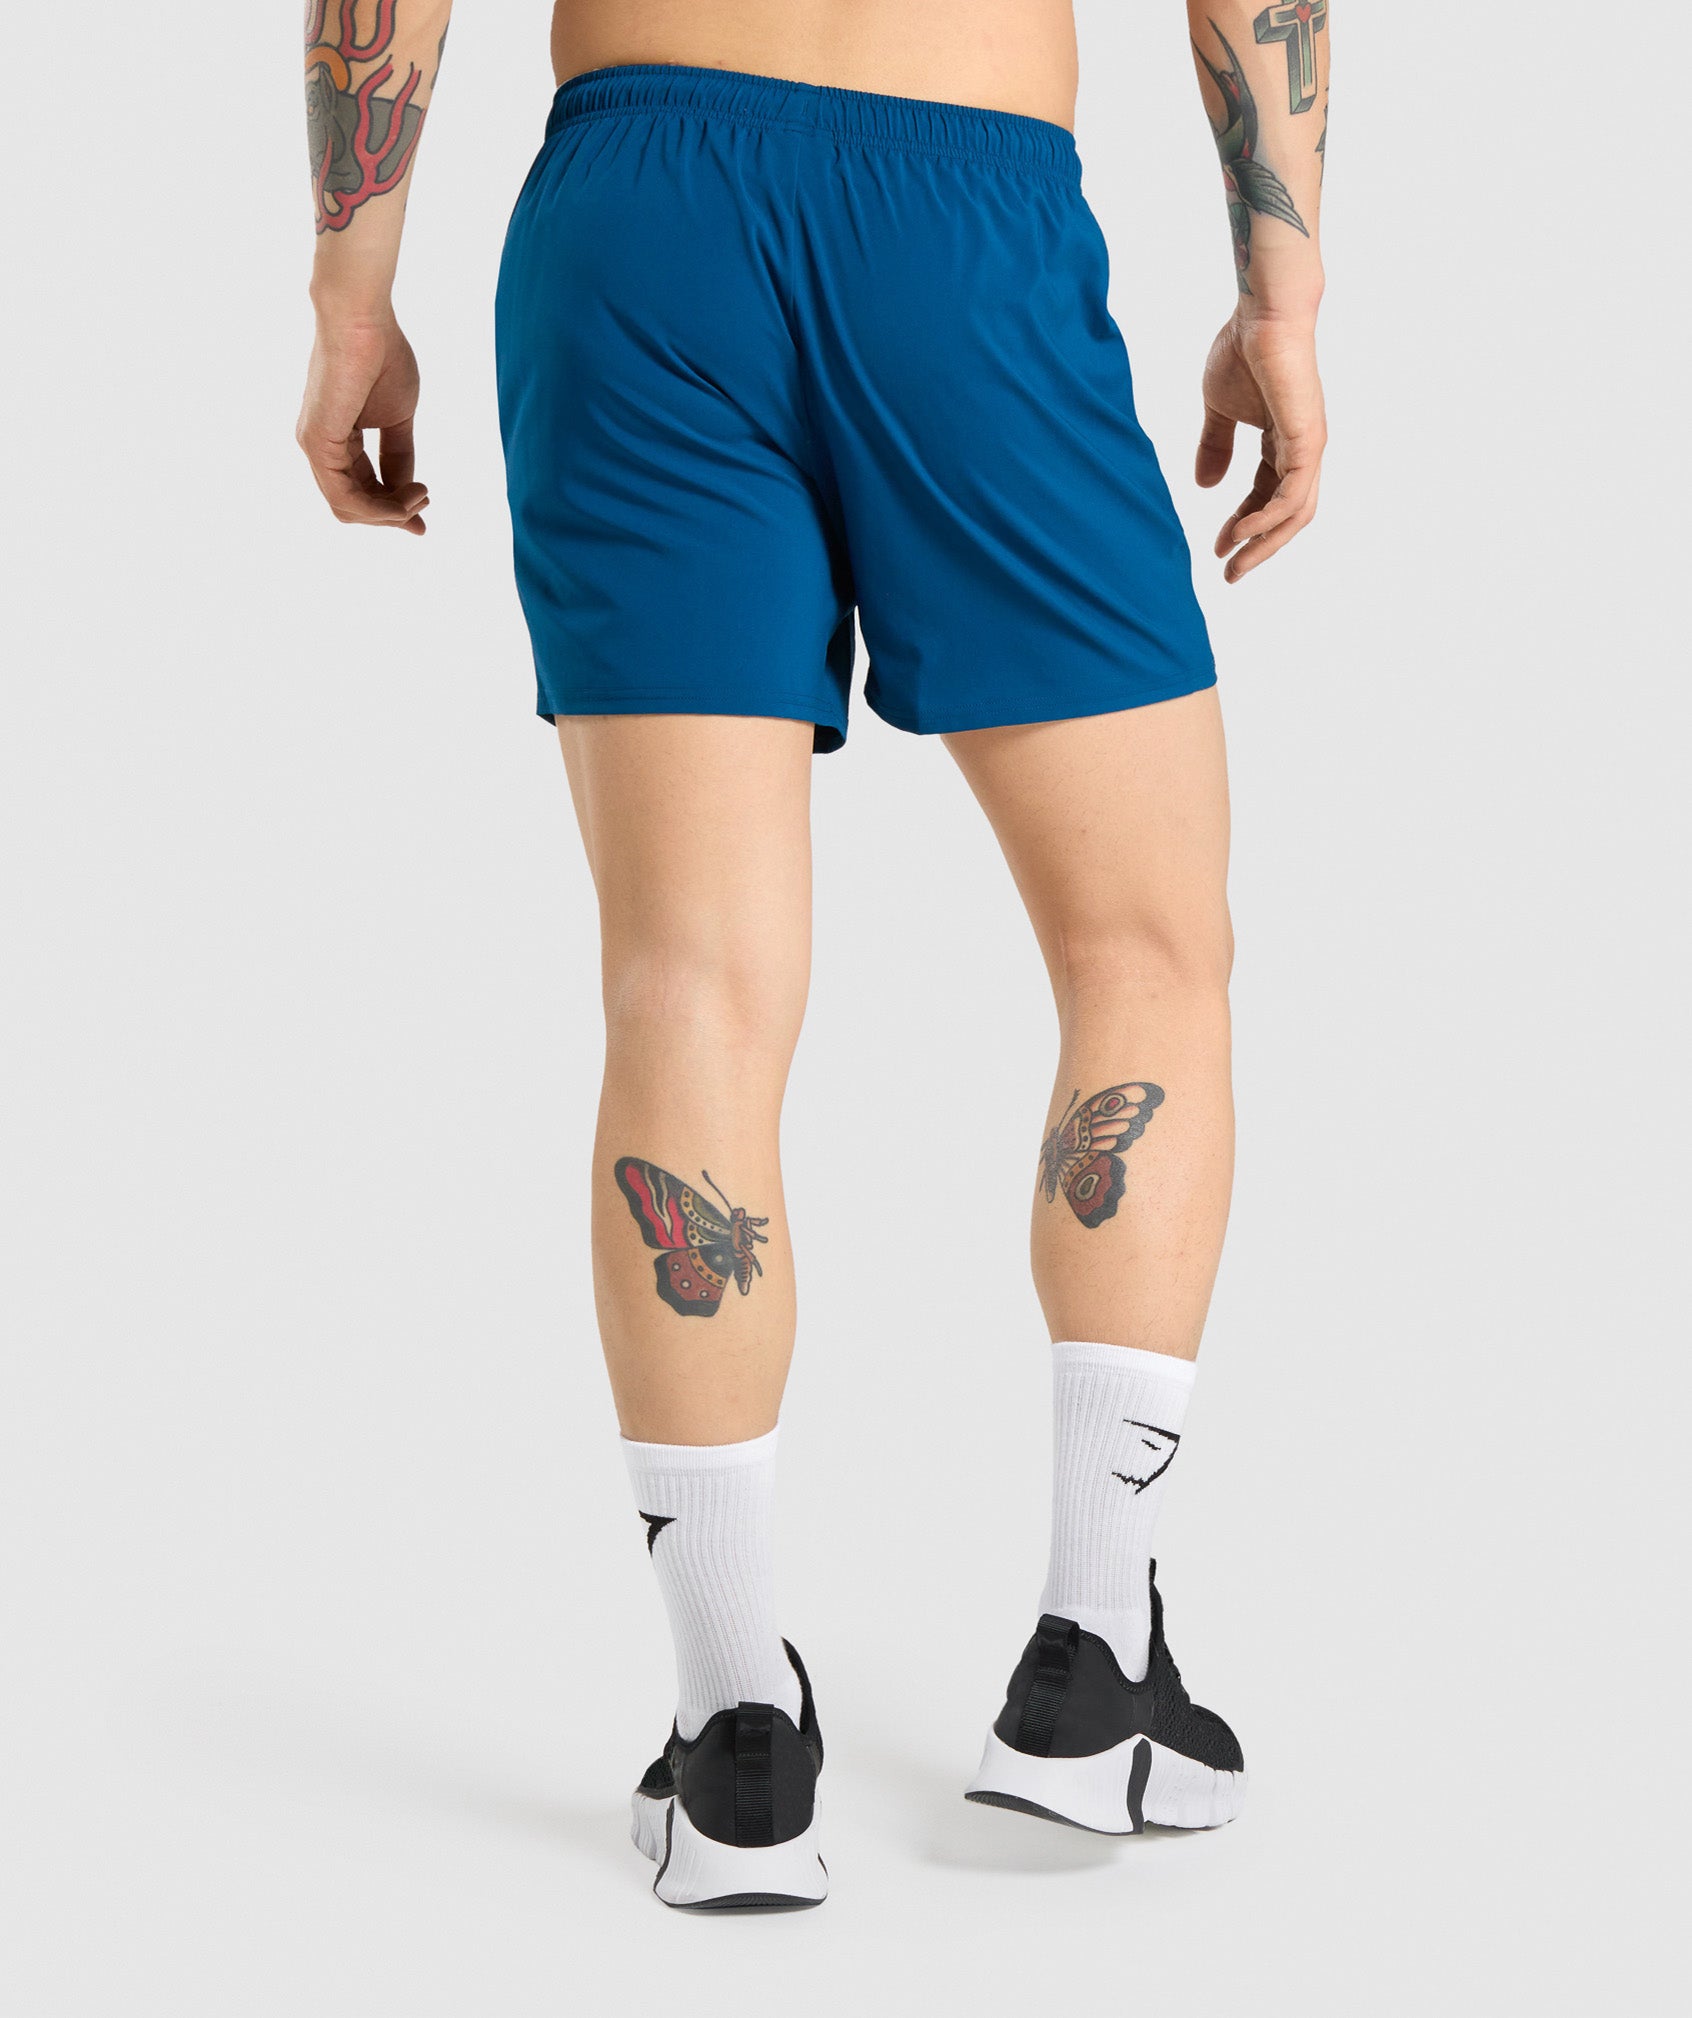 Arrival 5" Shorts in Petrol Blue - view 3